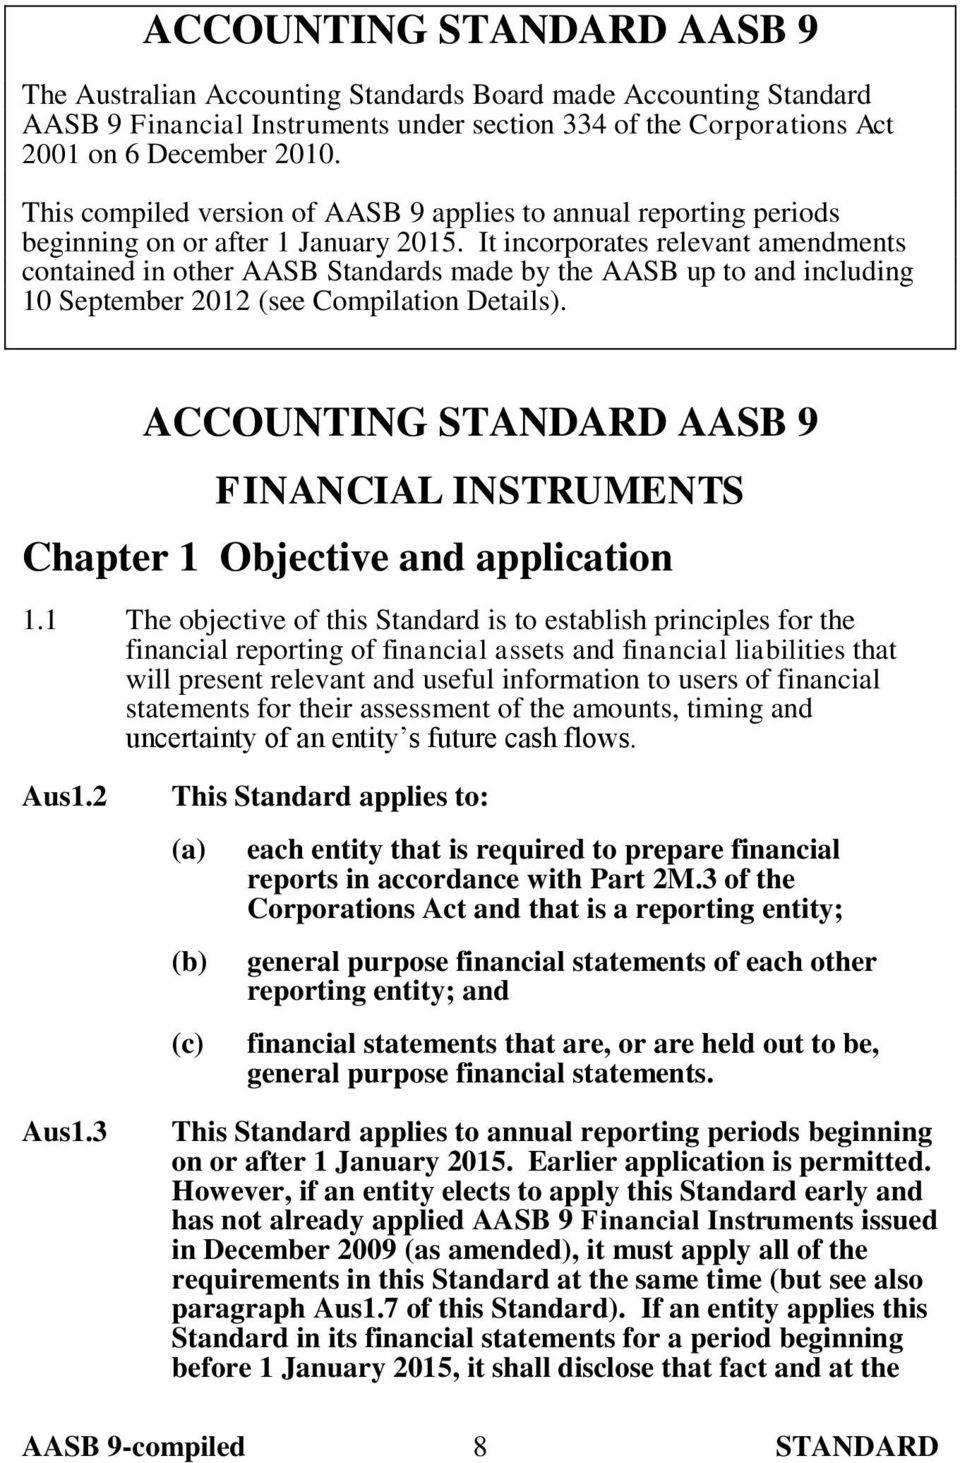 It incorporates relevant amendments contained in other AASB Standards made by the AASB up to and including 10 September 2012 (see Compilation Details).